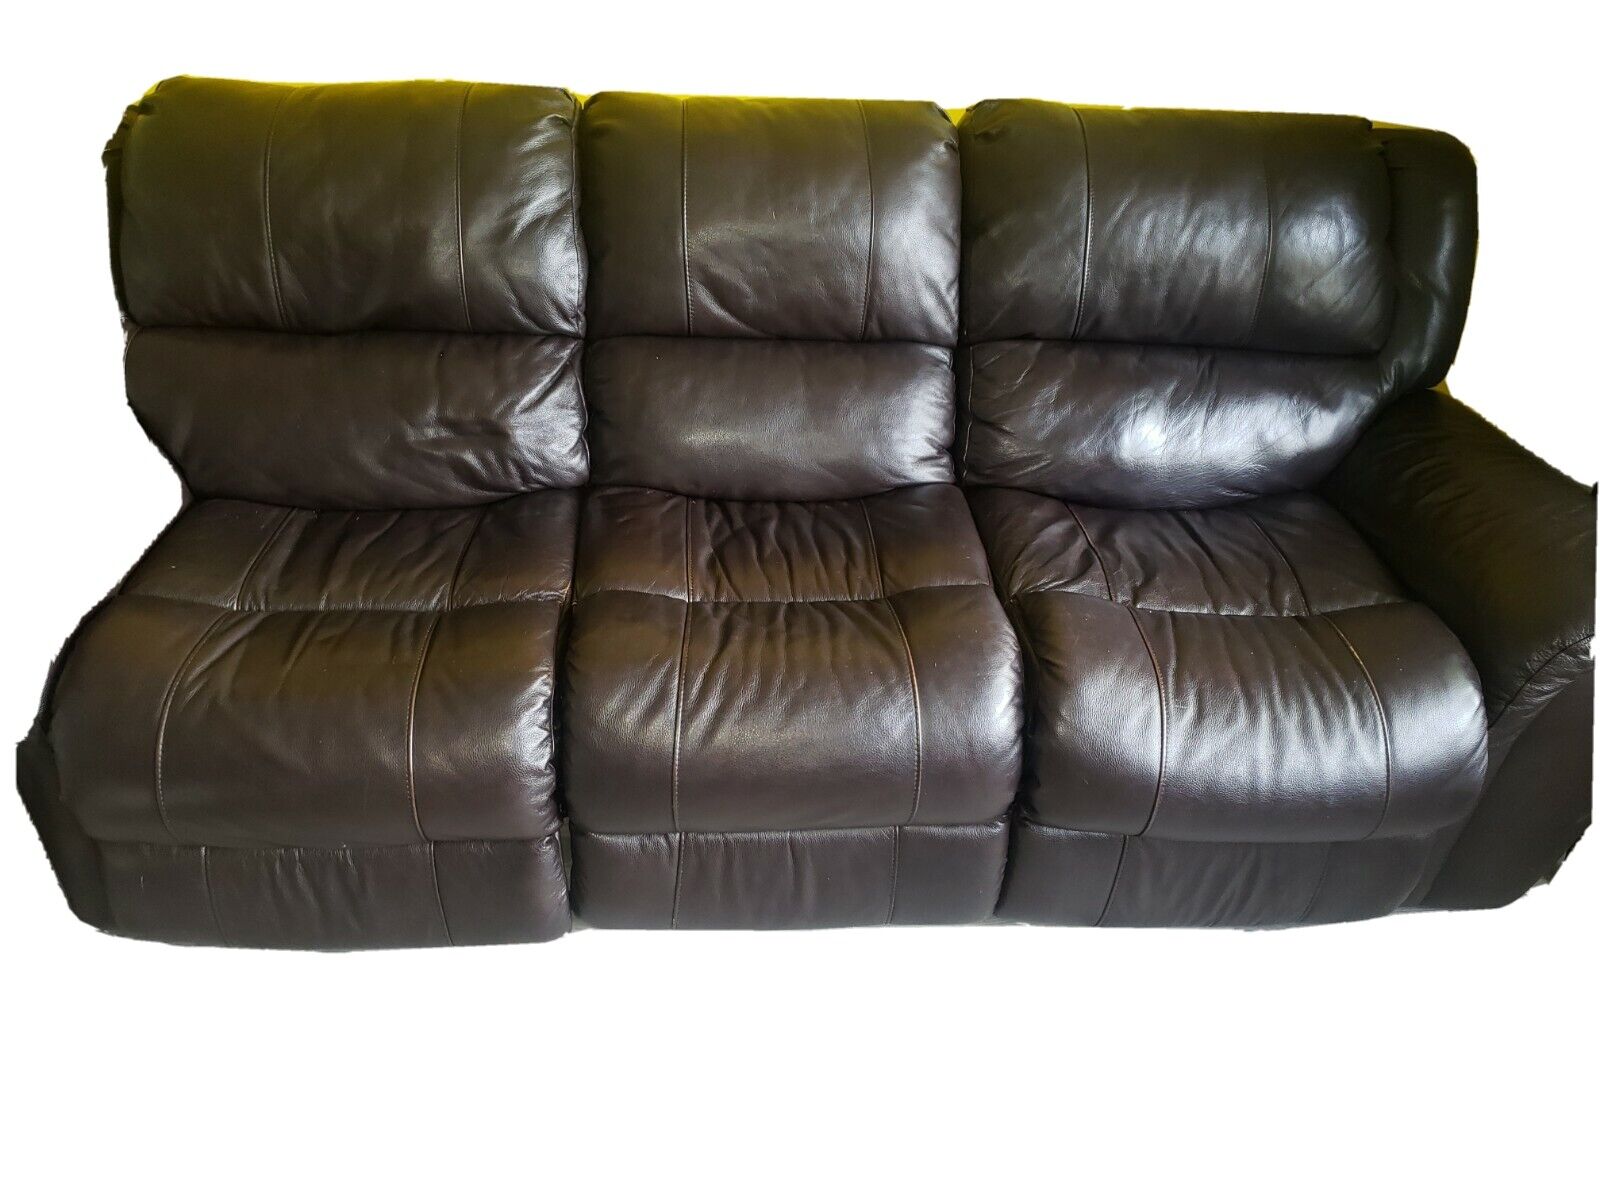 Divano Roma Furniture Classic Loveseat, Roma Leather Reclining Sofa Reviews Best Quality